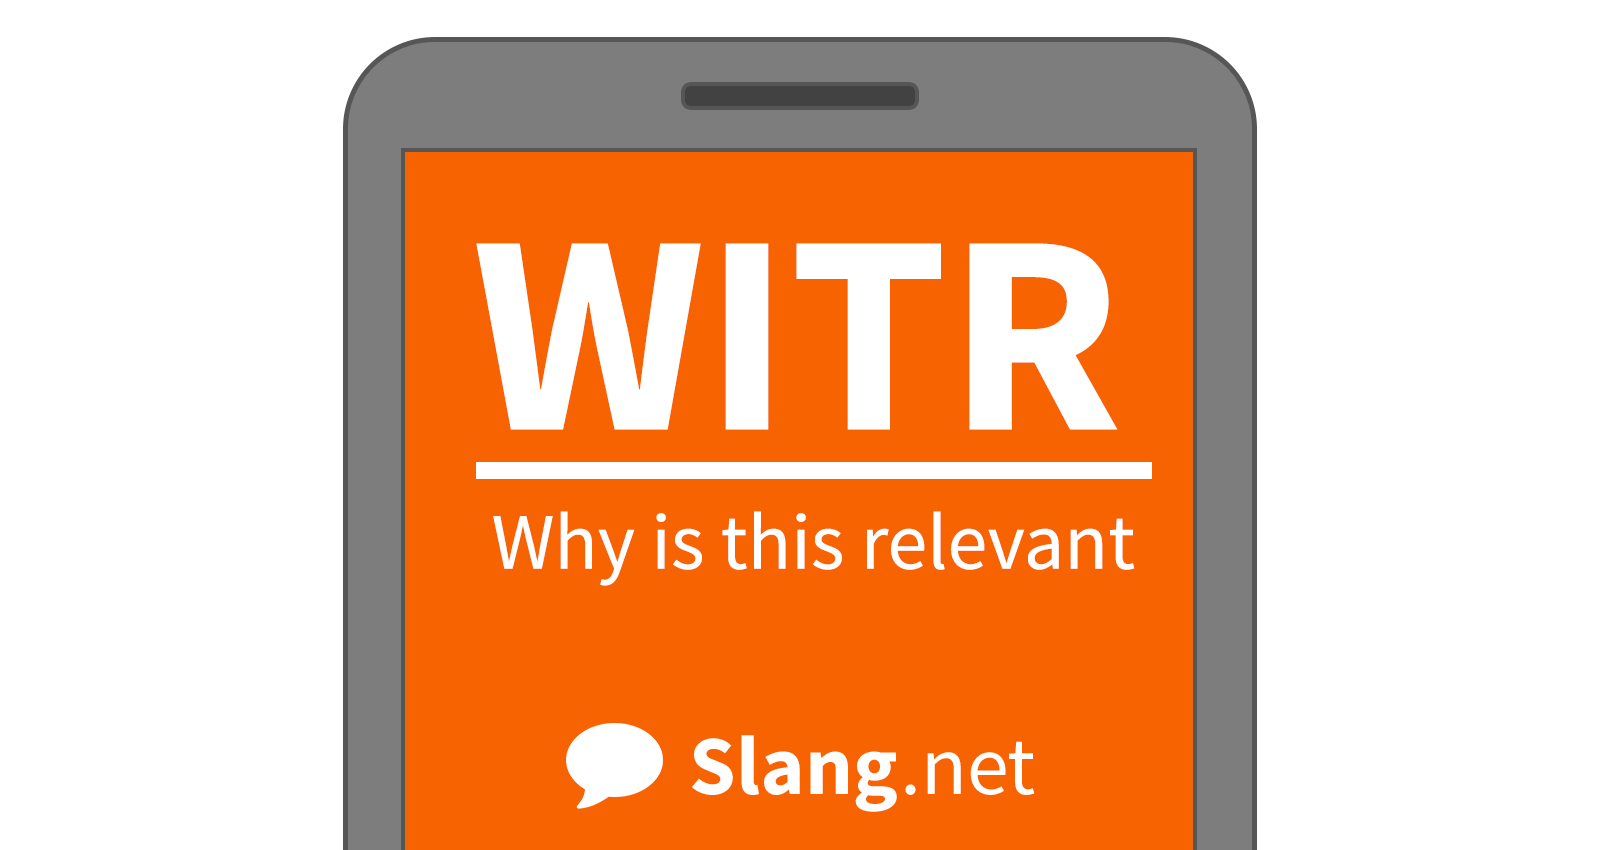 People will likely use WITR when messaging online and texting